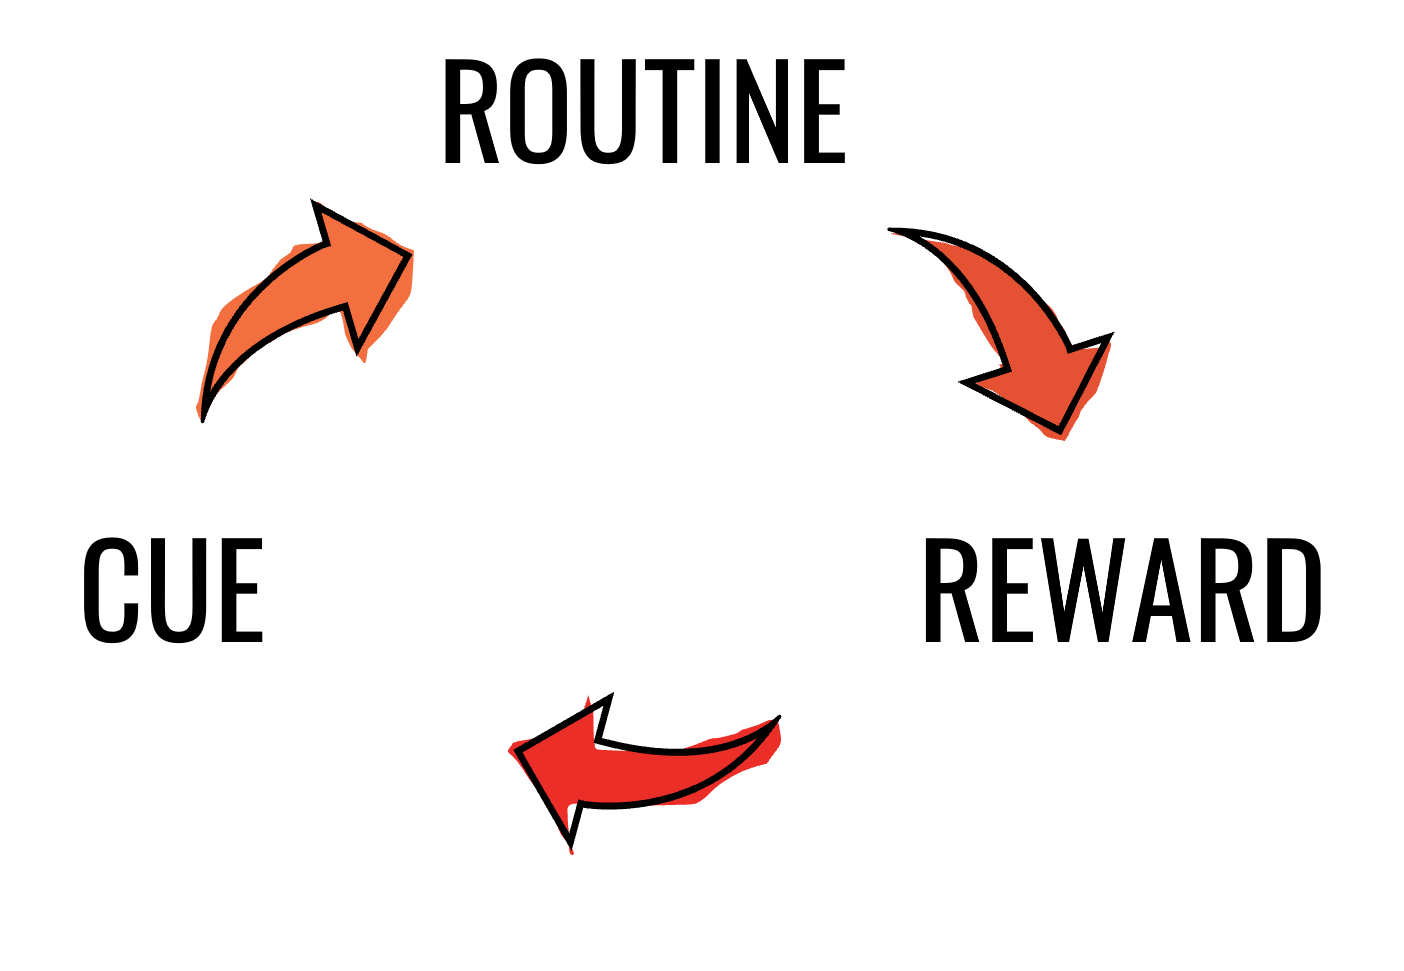 Diagram showing the habit loop, with the words 'cue', 'routine' and 'reward' with arrows going around making it a circular process